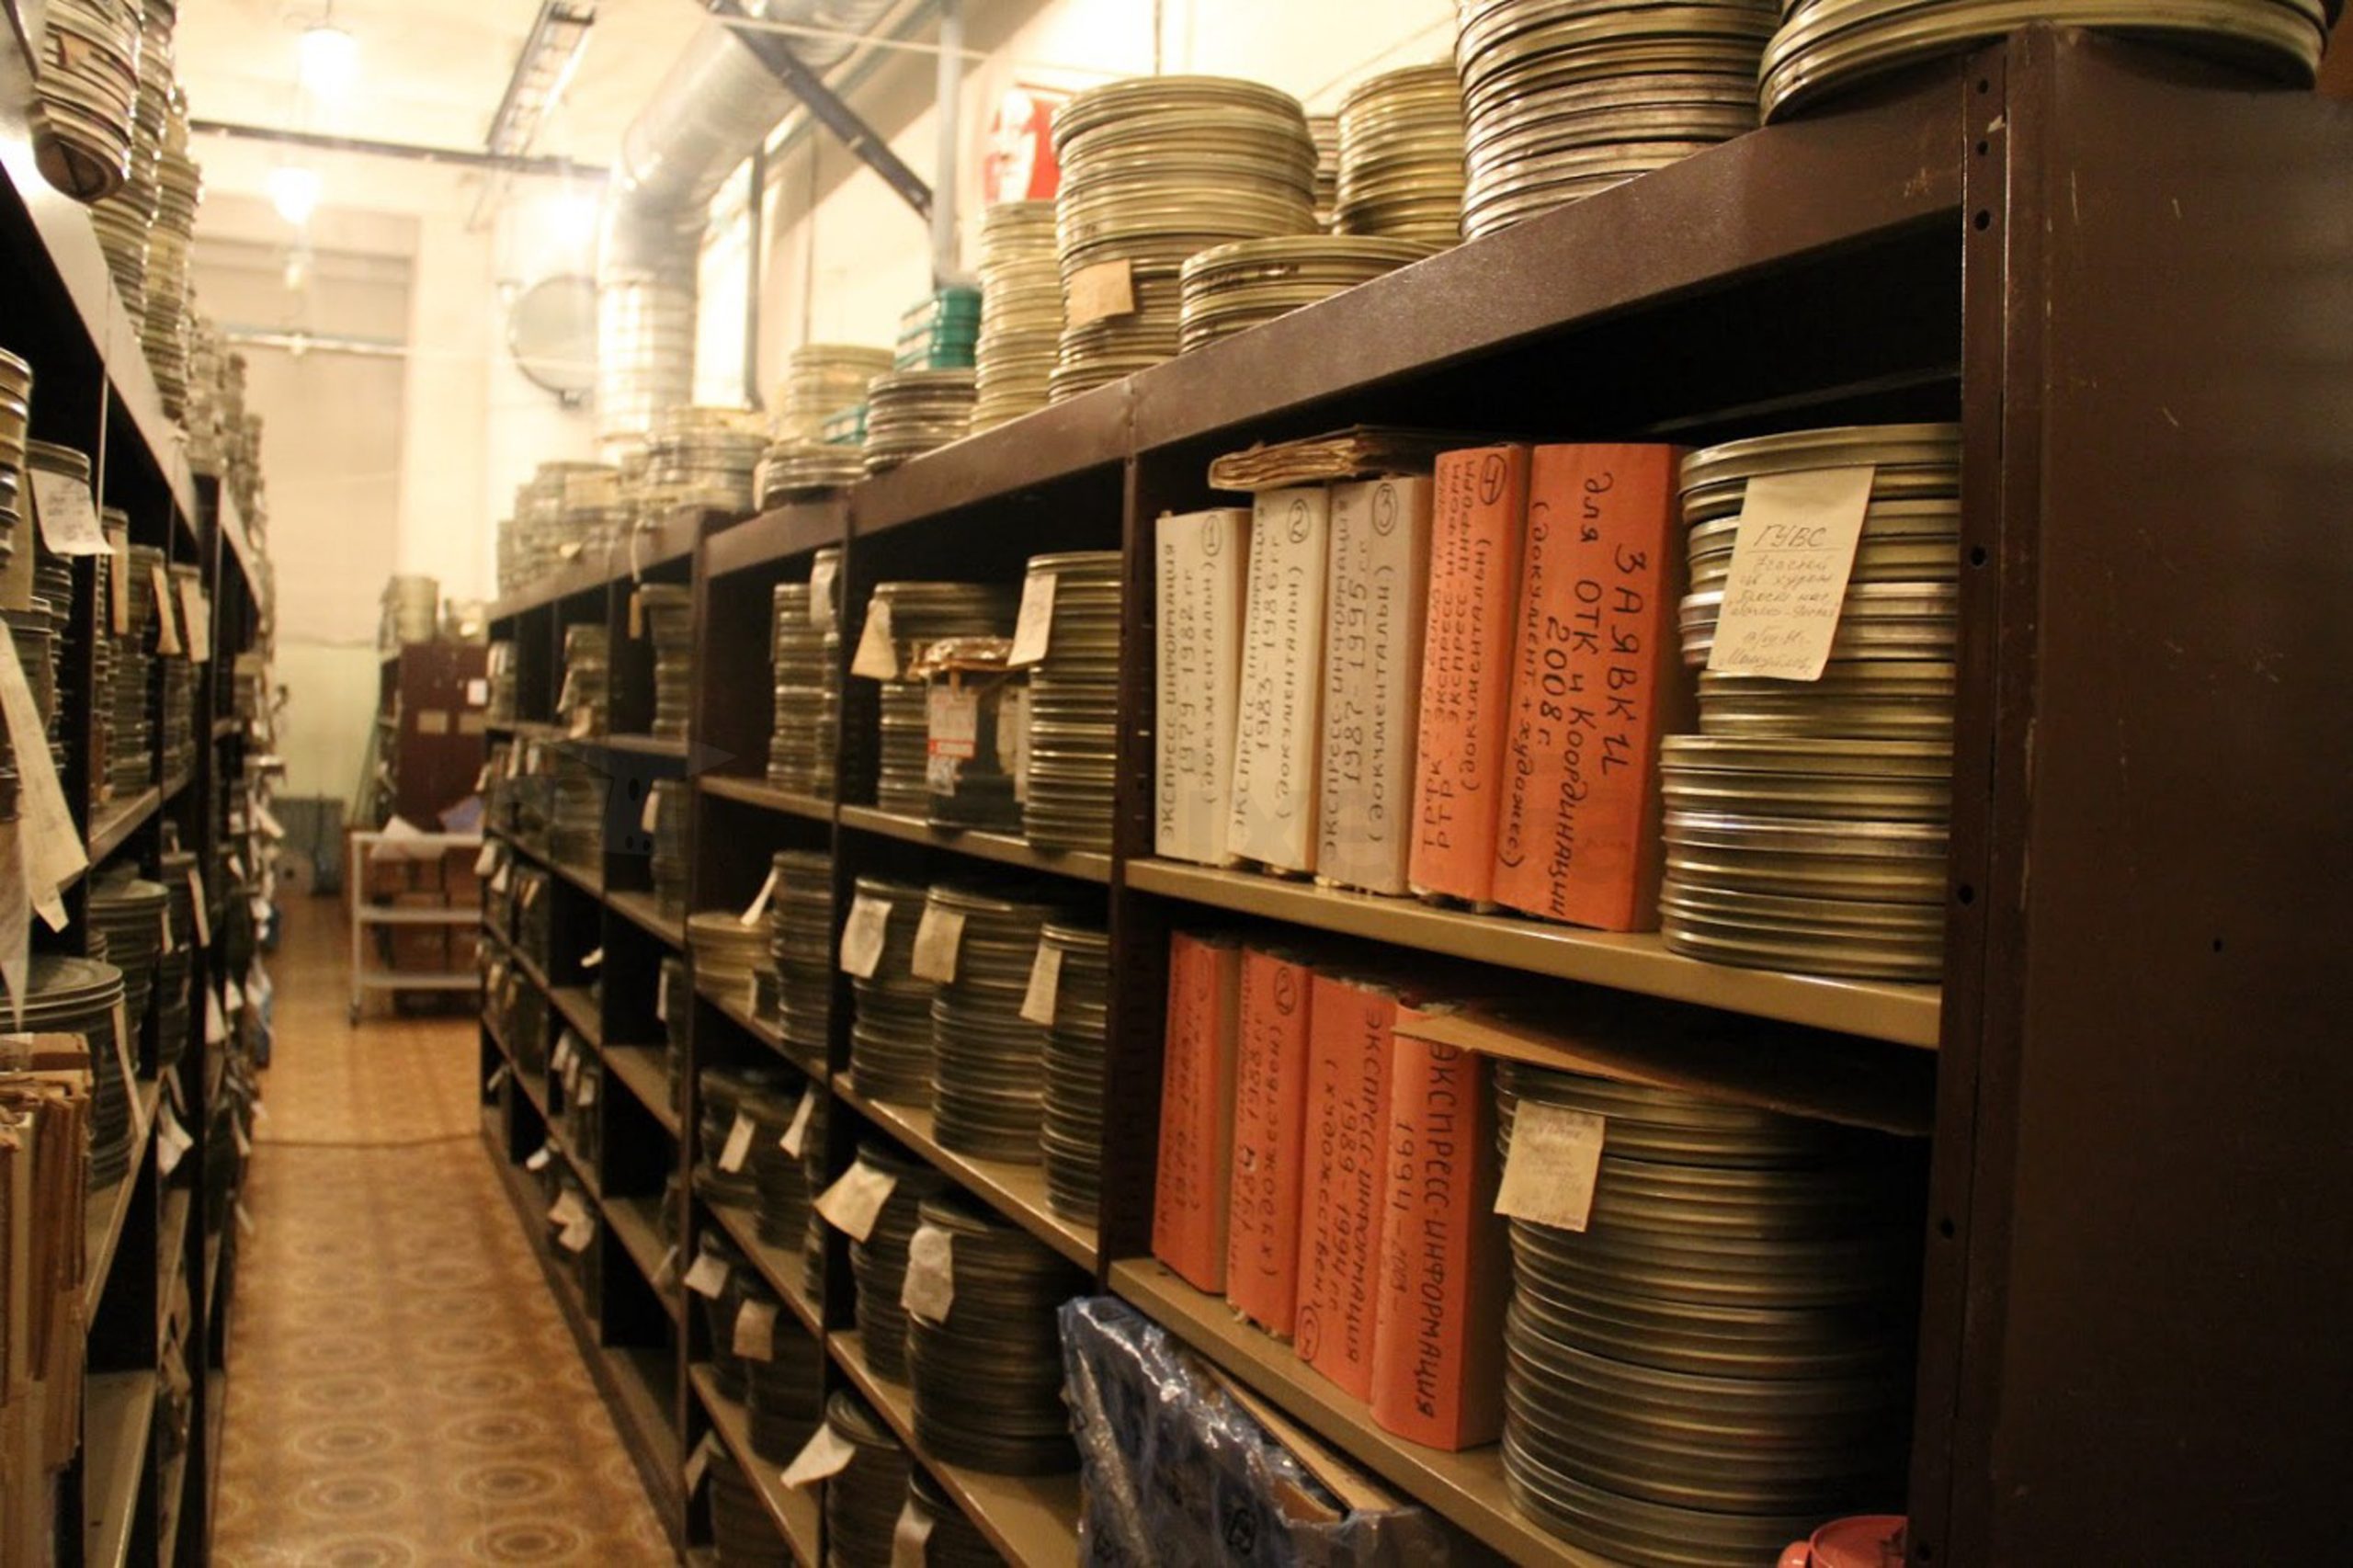 film cans on shelves inside the Russian archive